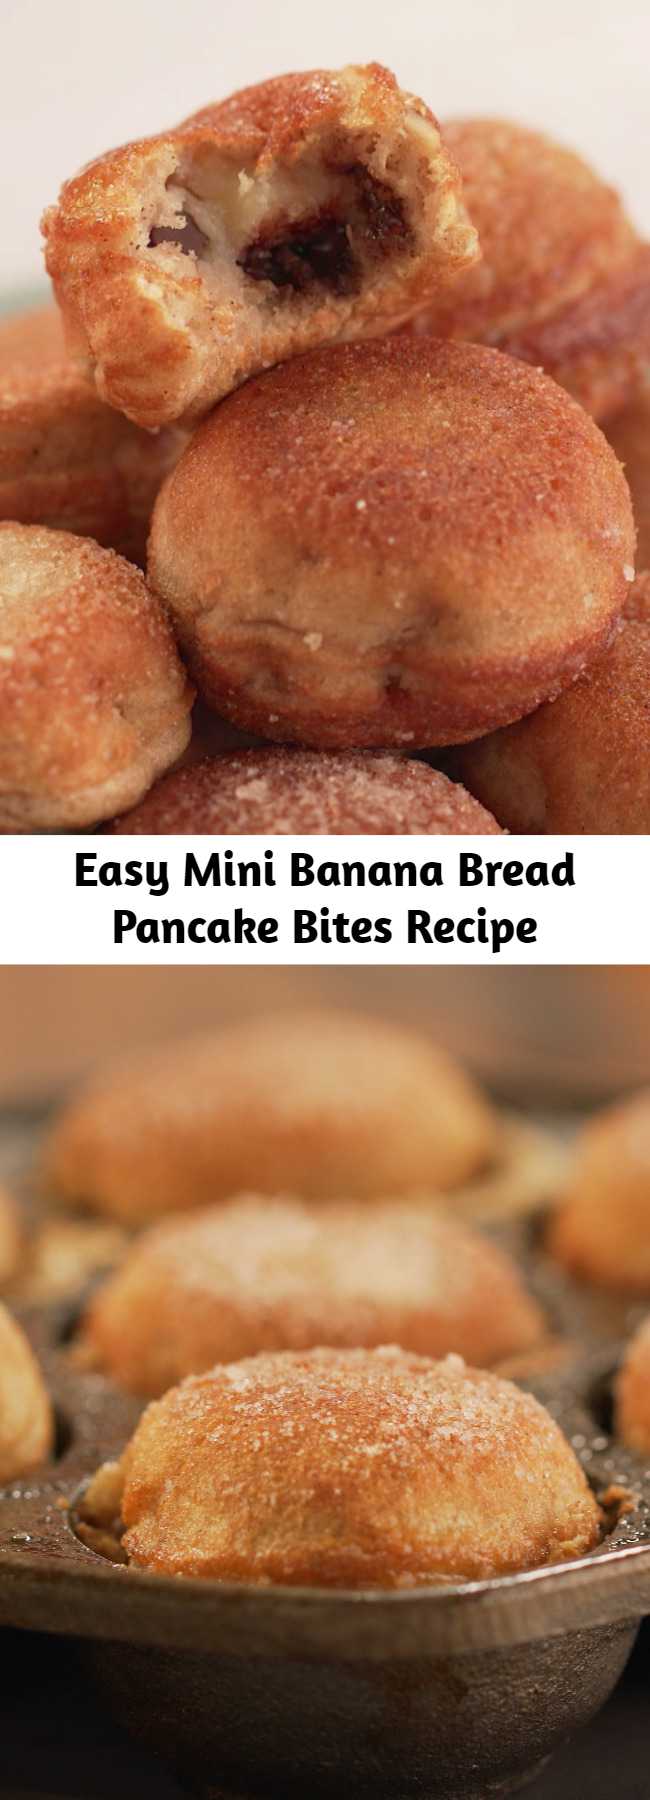 Easy Mini Banana Bread Pancake Bites Recipe - These light and fluffy bites are the perfect melding of two of your favorite comfort foods. Whether you enjoy them for breakfast or as a snack, they're sure to be your new favorite!